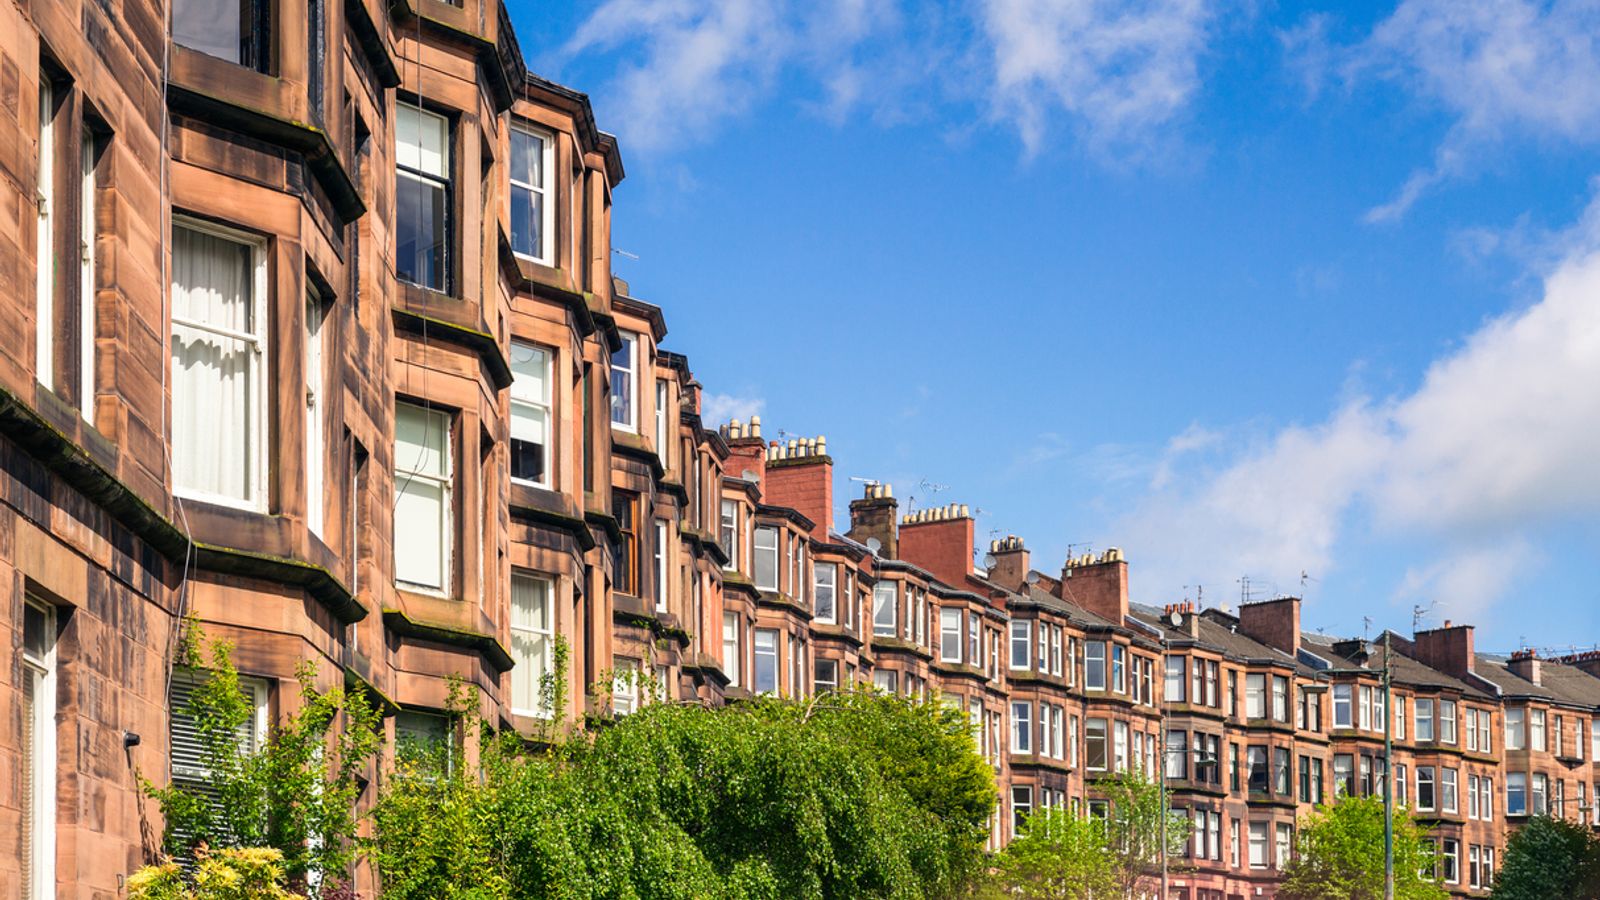 Second home owners in Scotland set to be charged double council tax